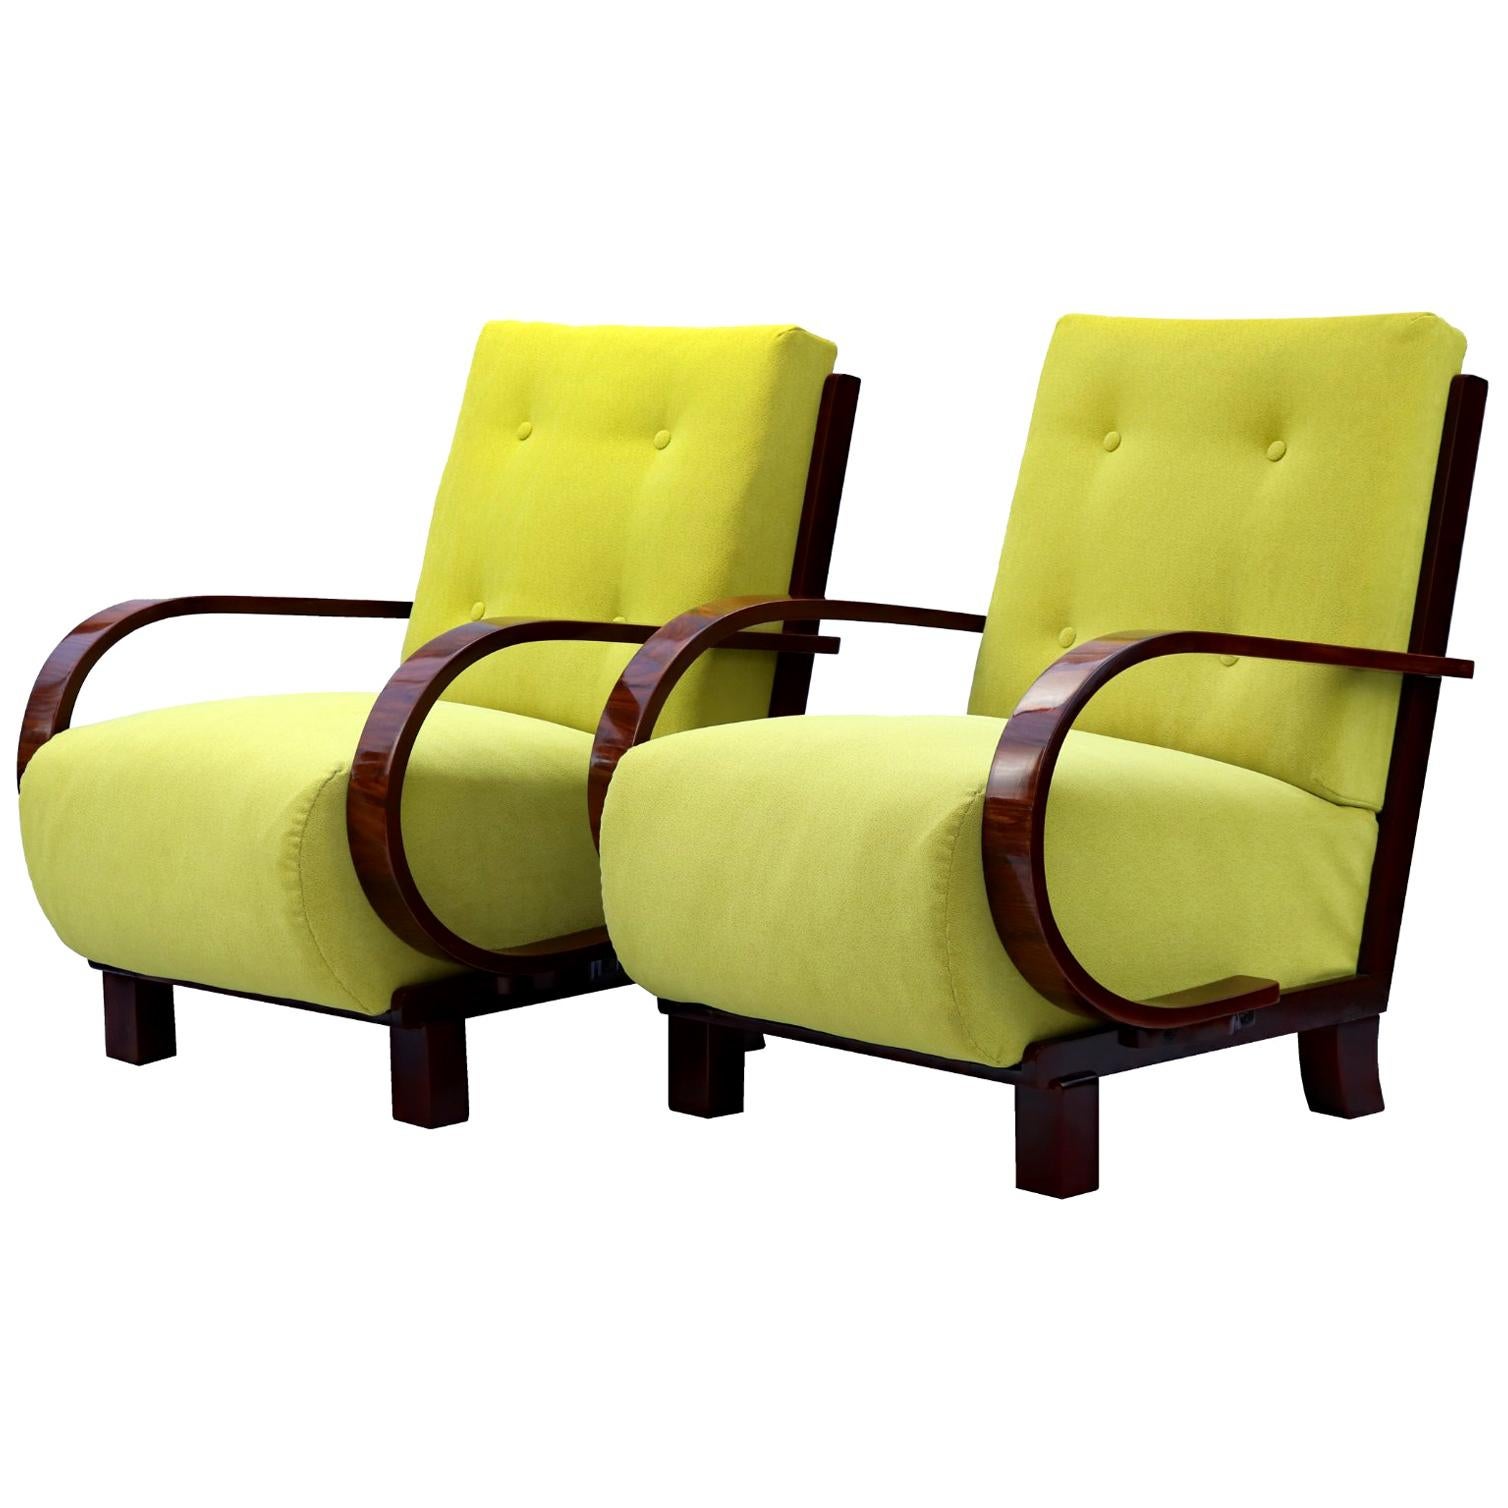 Pair of Art Deco Armchairs Fully Restored, circa 1930